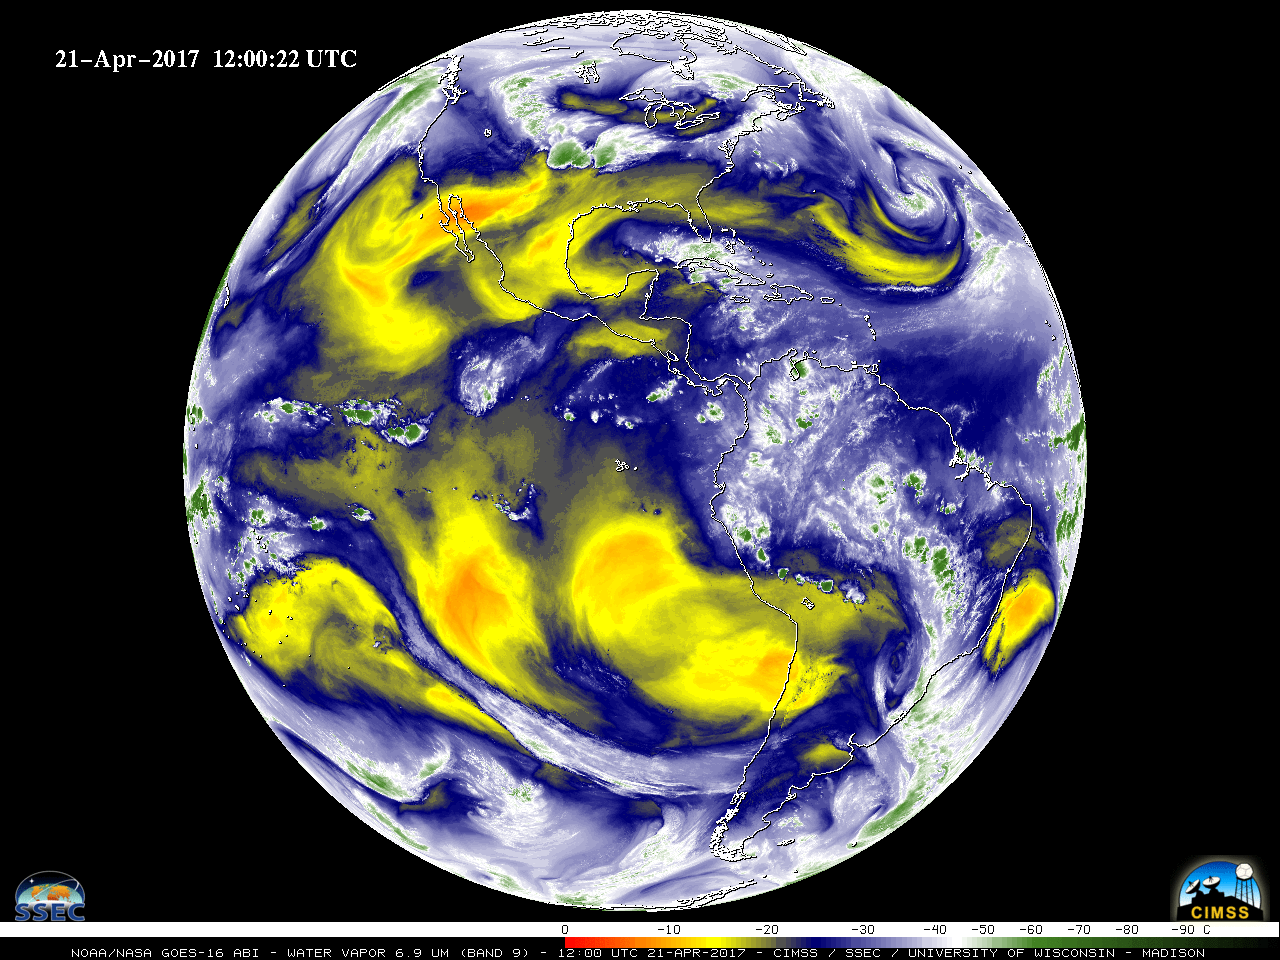 GOES-16 Mid-Level Water Vapor (6.9 µm) images [click to play animation]